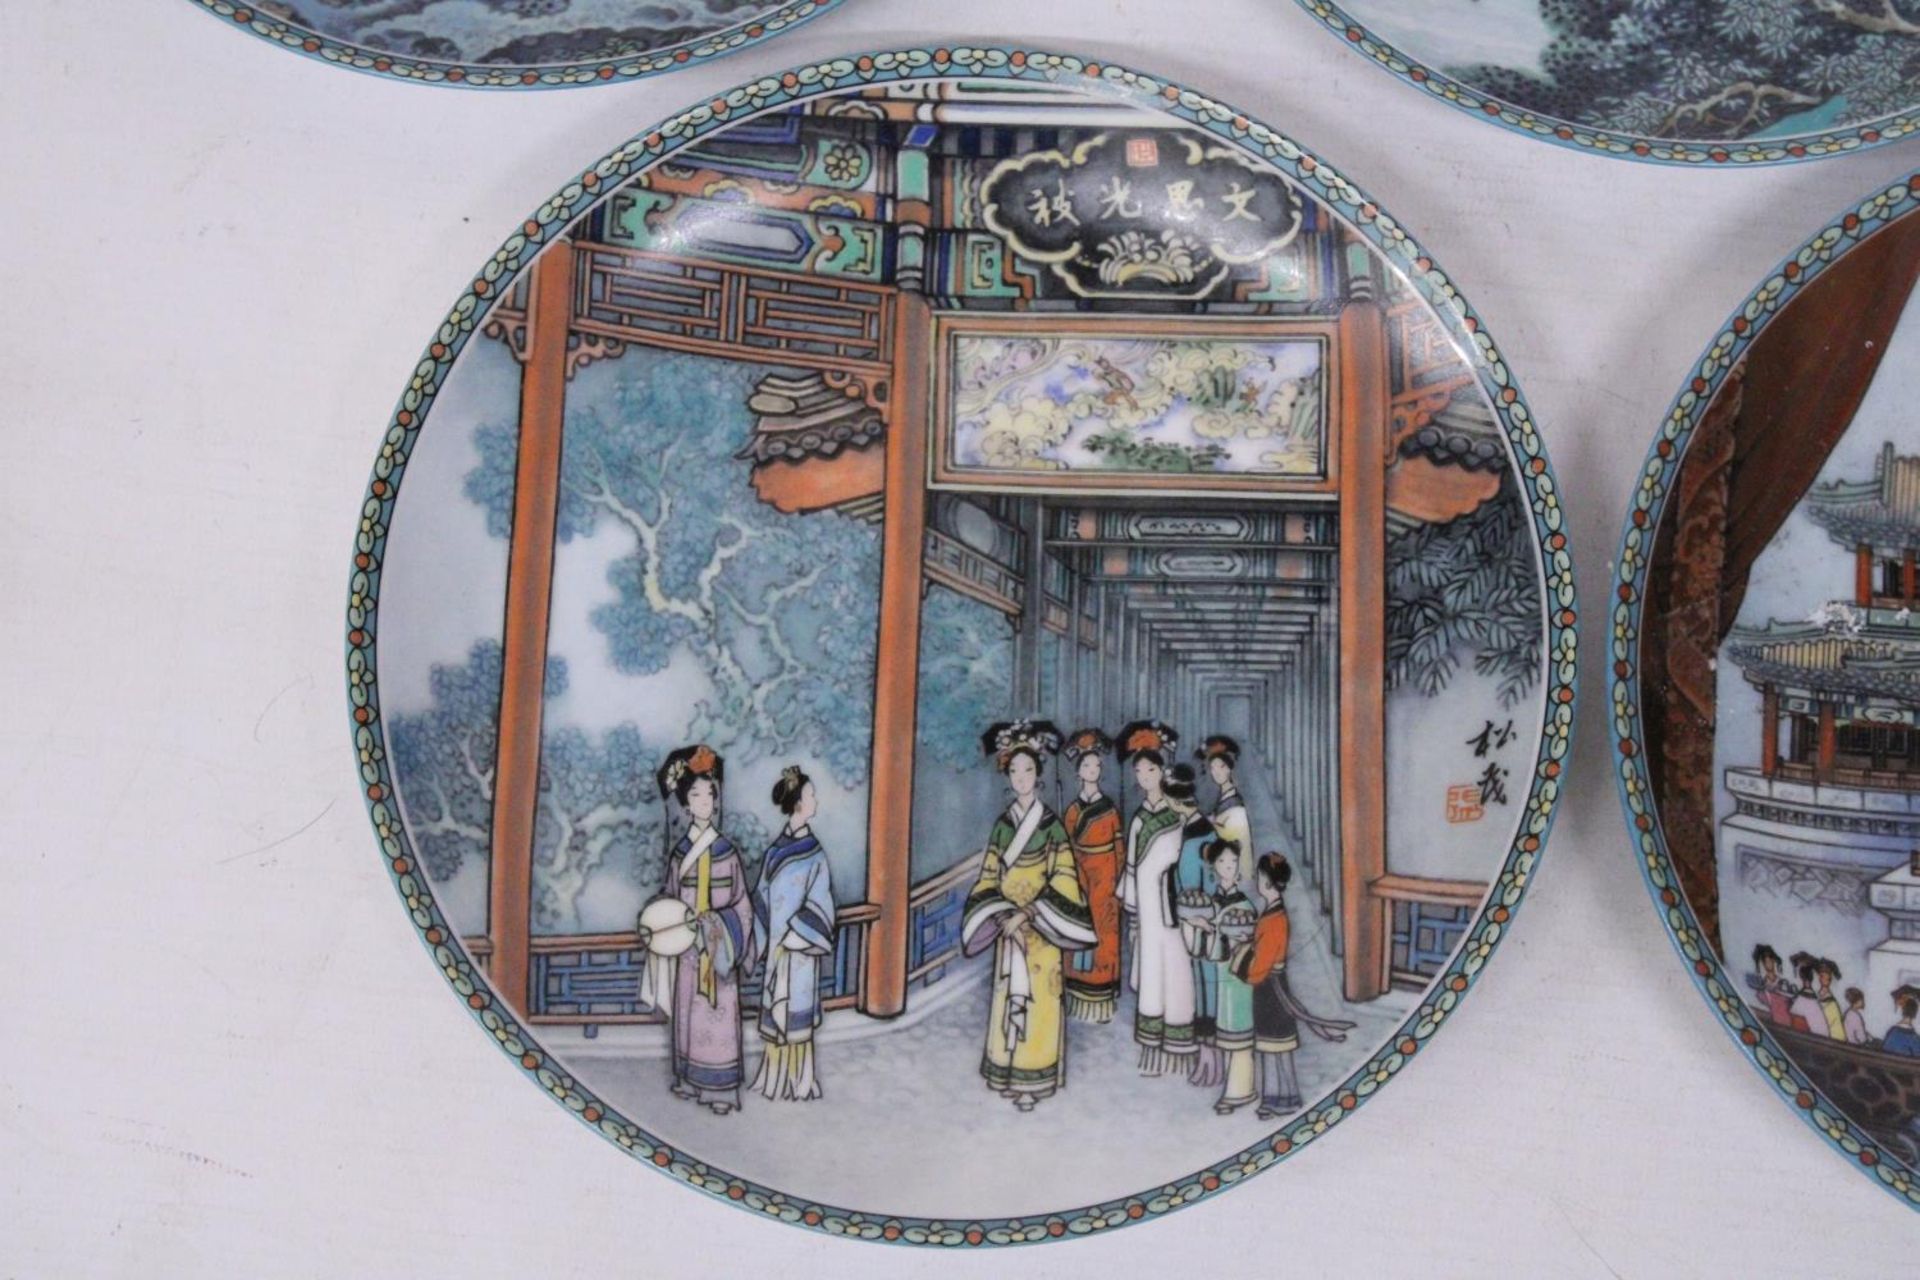 FIVE VINTAGE IMPERIAL JINGDEZHEN PORCELAIN PLATES SCENES FROM THE SUMMER PALACE - 21 CM - Image 5 of 8